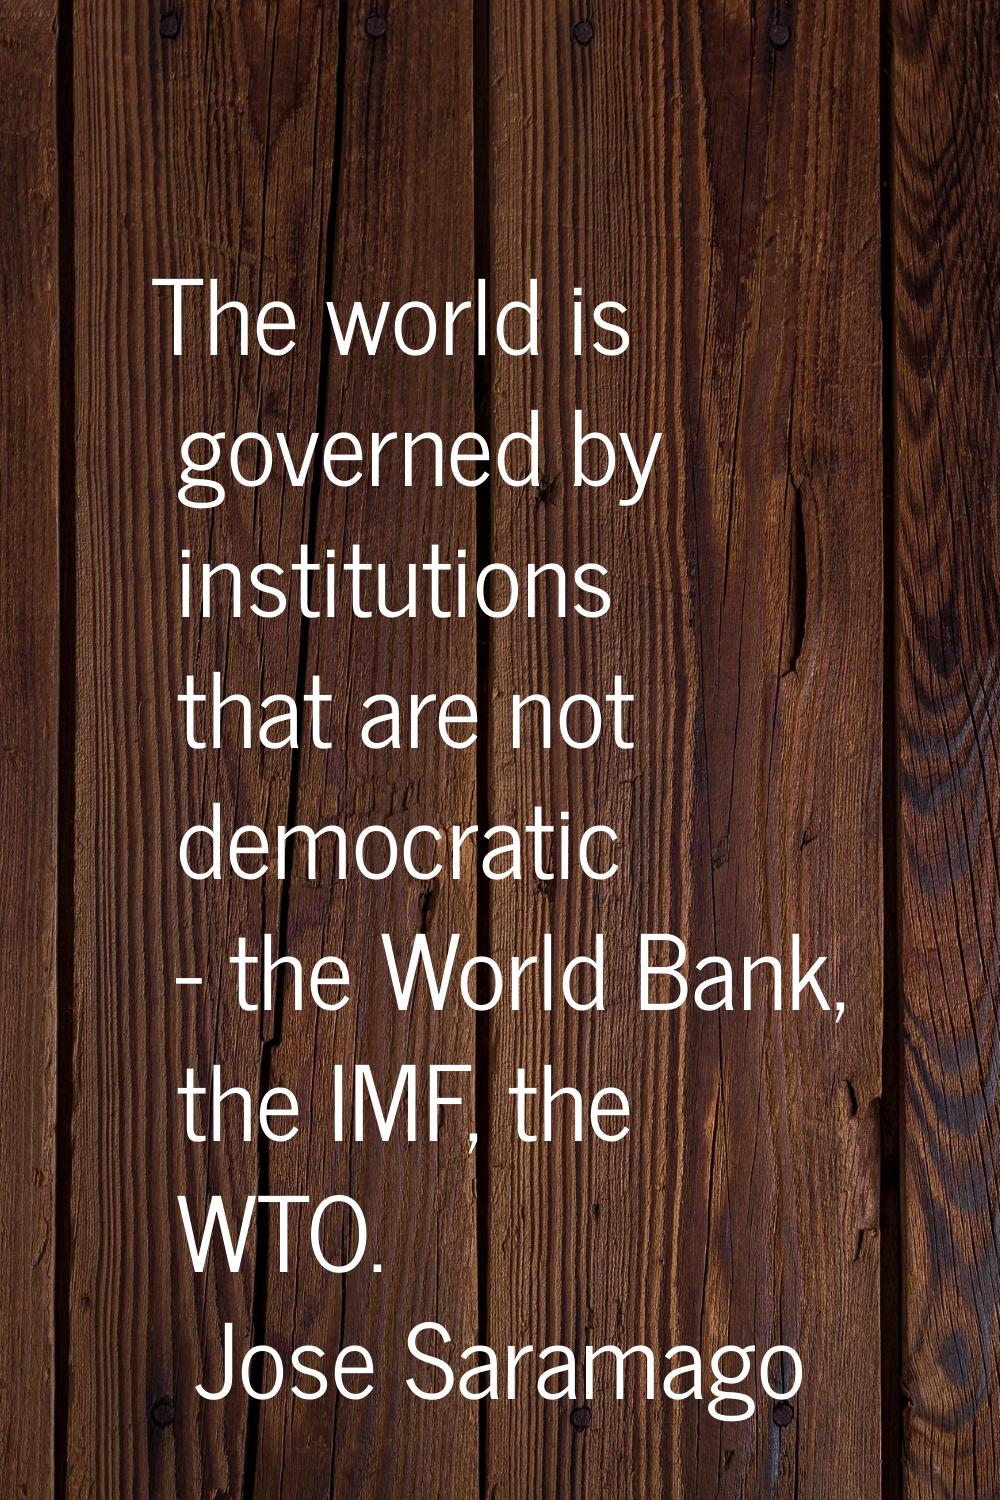 The world is governed by institutions that are not democratic - the World Bank, the IMF, the WTO.